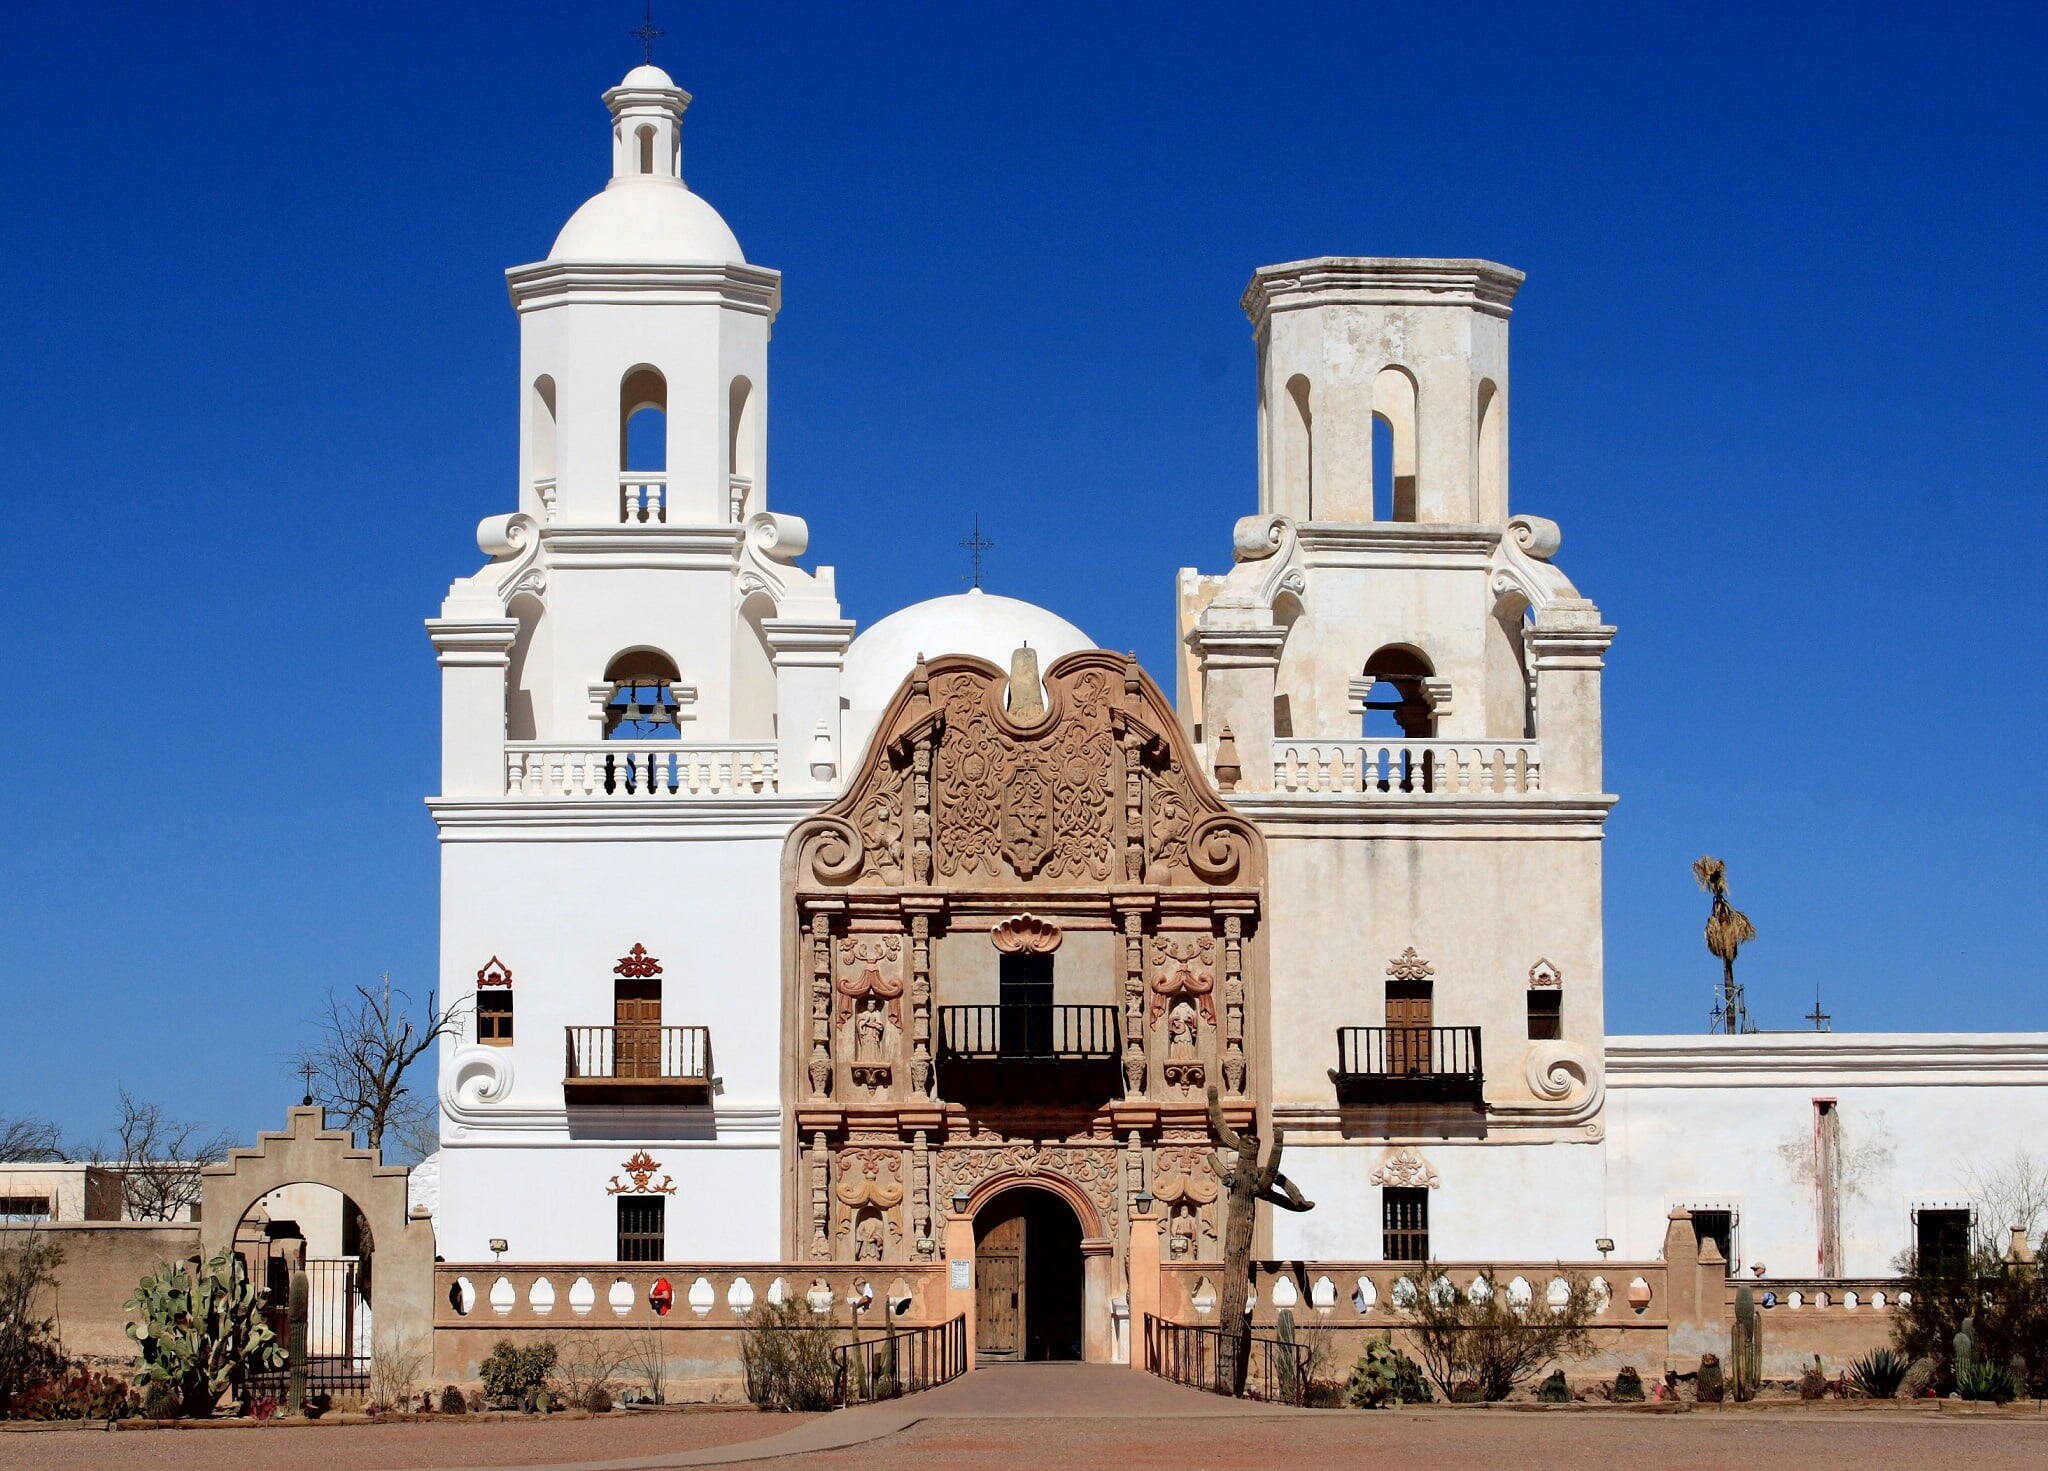 Tucson - The Mission Xavier del Bac is an impressive site about 10 miles south of Tucson, AZ. The outside is gleaming white and the inside is a mix of colors - it was definitely worth a trip to visit this Mission.